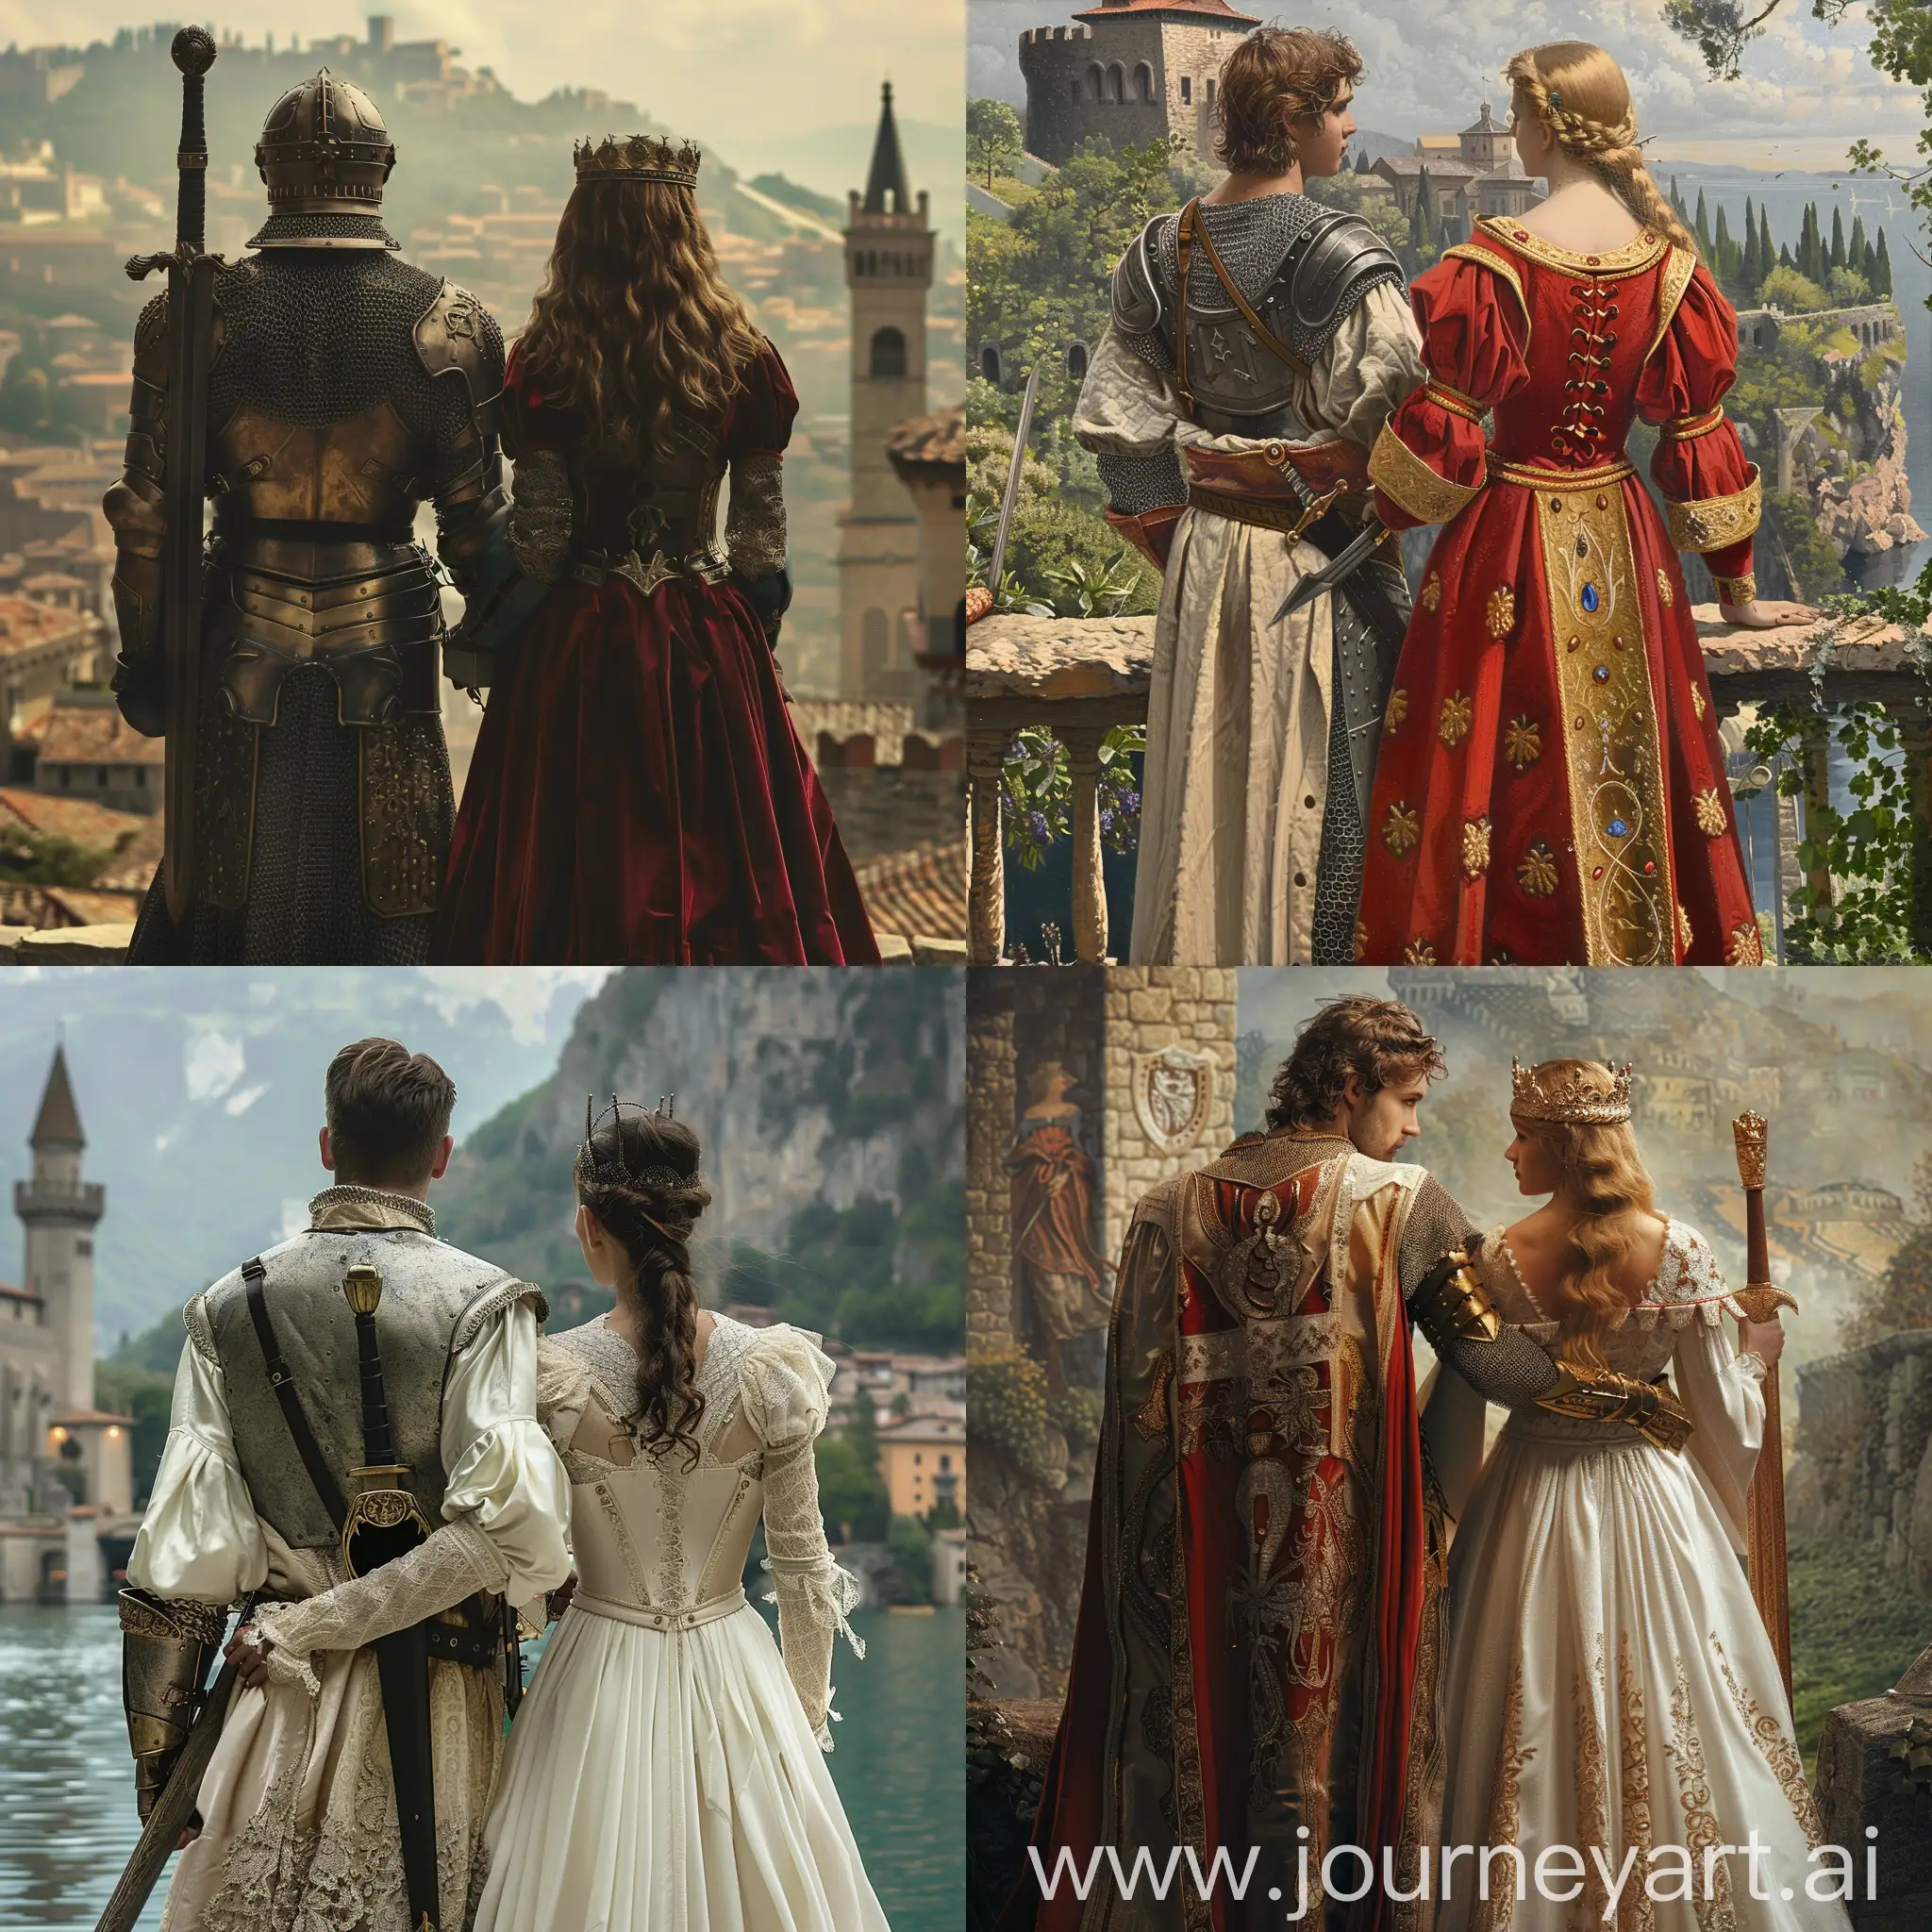 King-Arthur-and-Queen-in-Italy-Romantic-Medieval-Scene